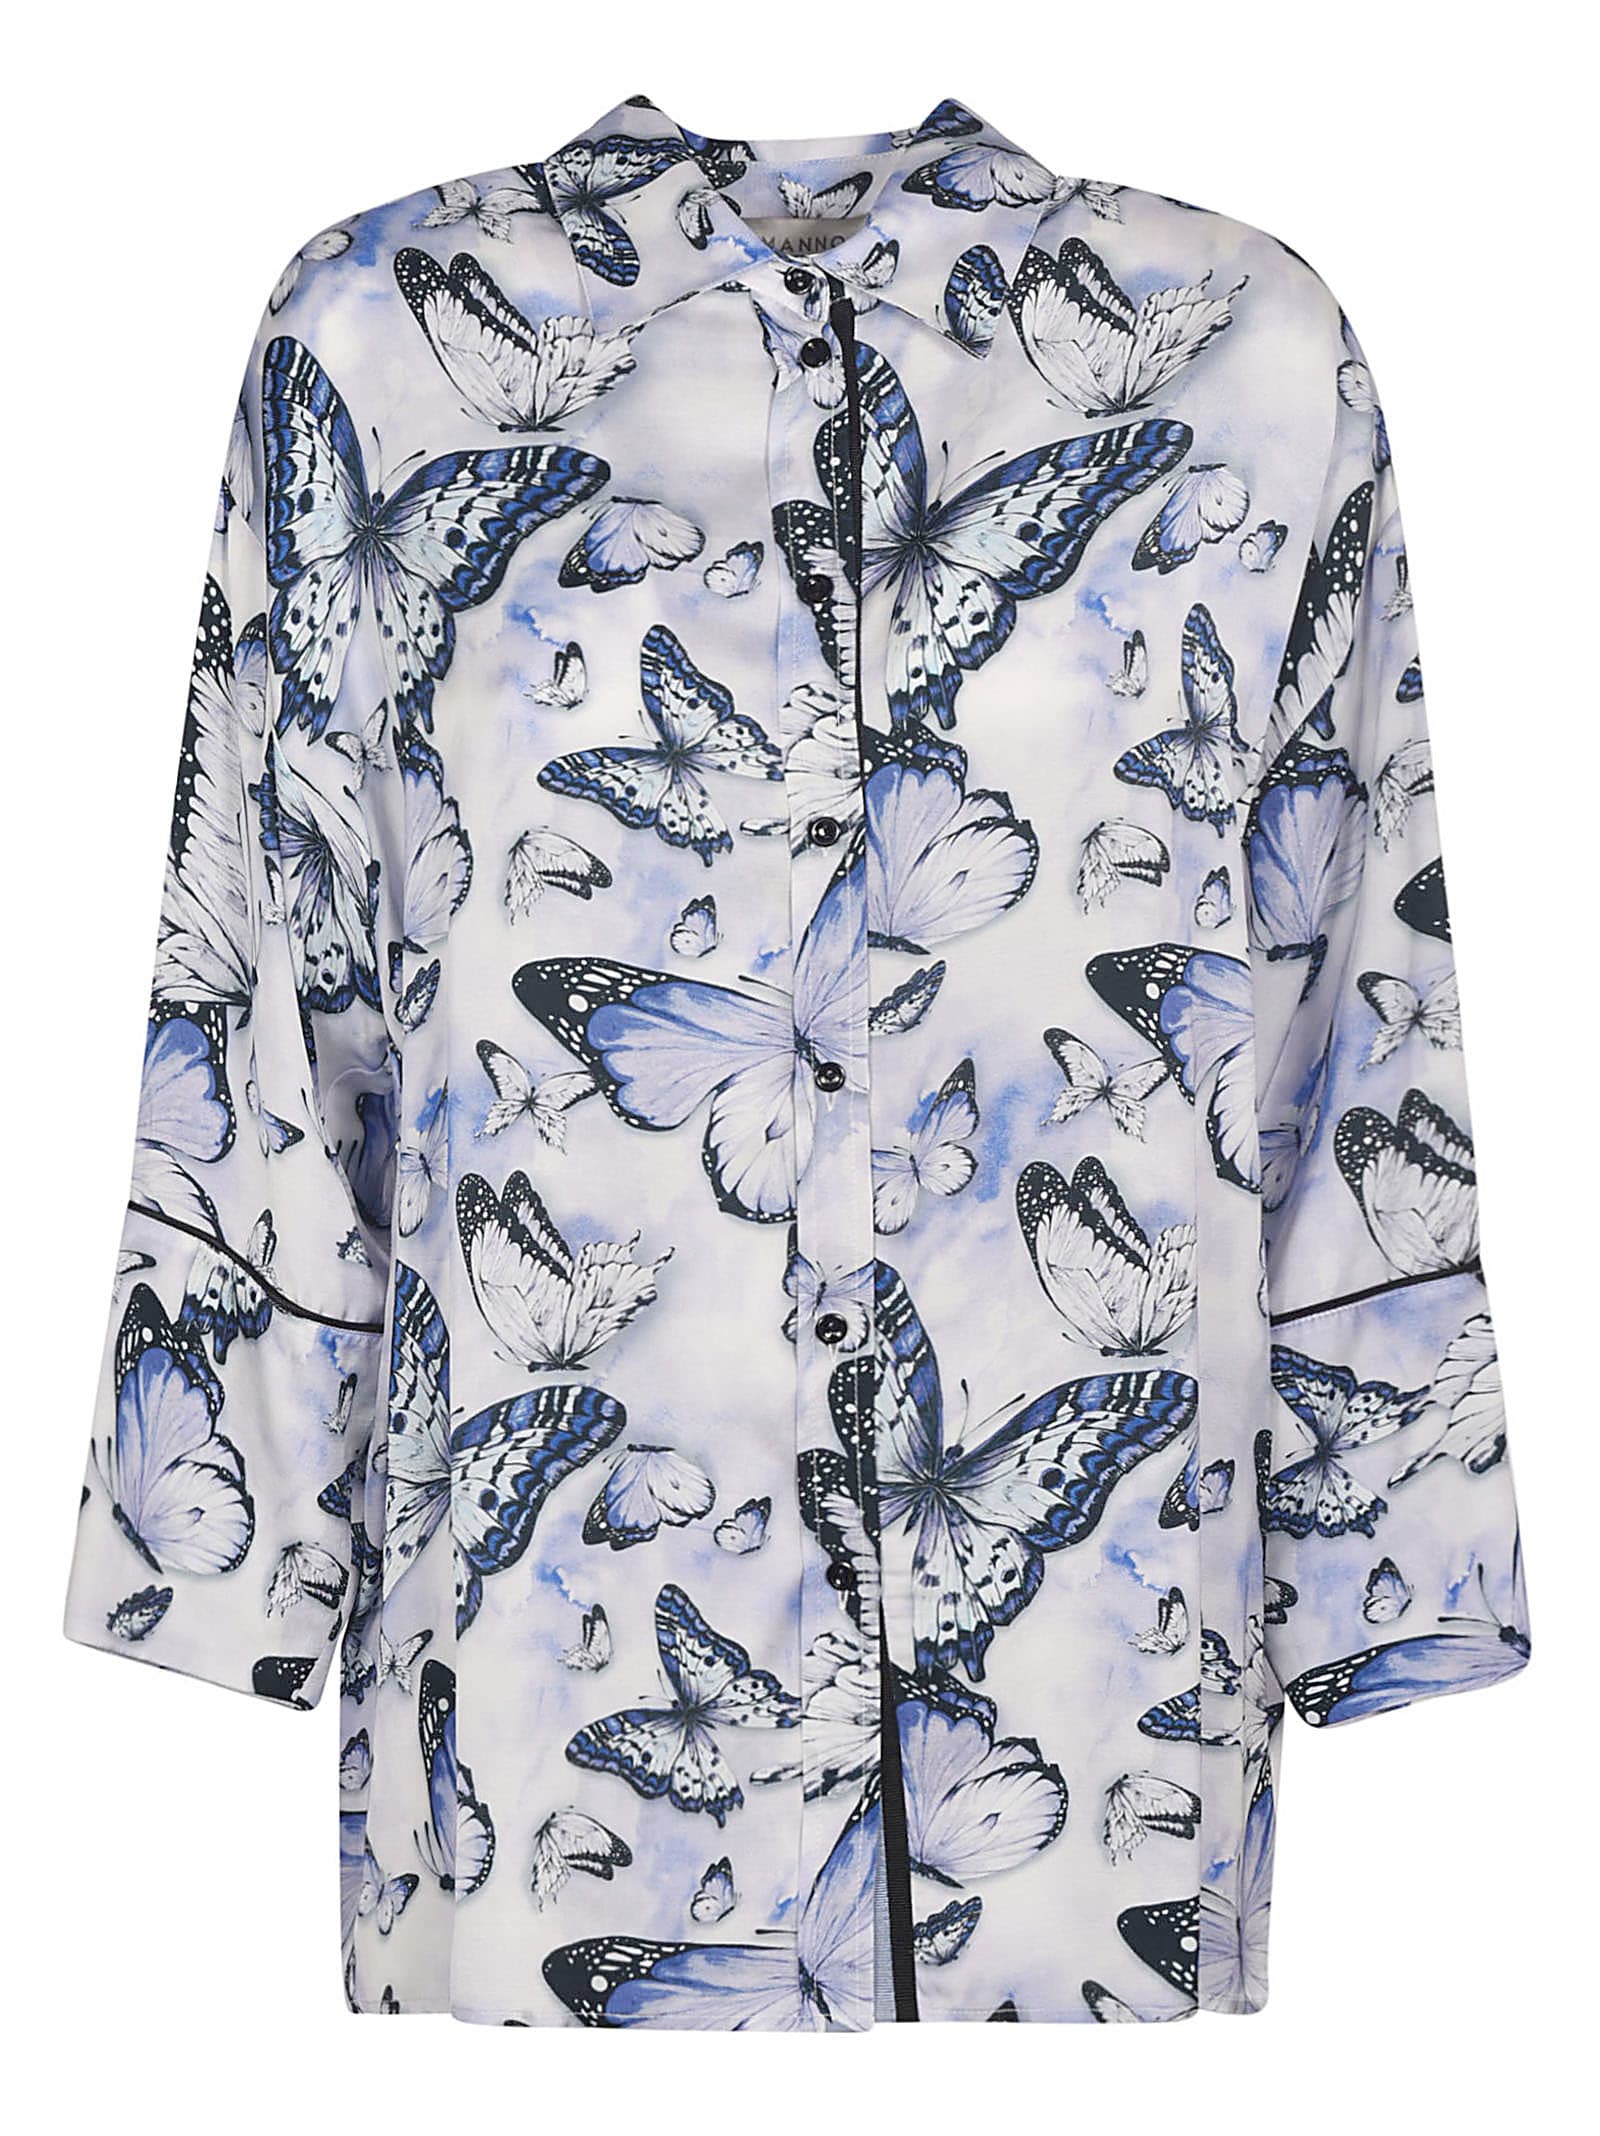 Ermanno Ermanno Scervino Butterfly Print Shirt